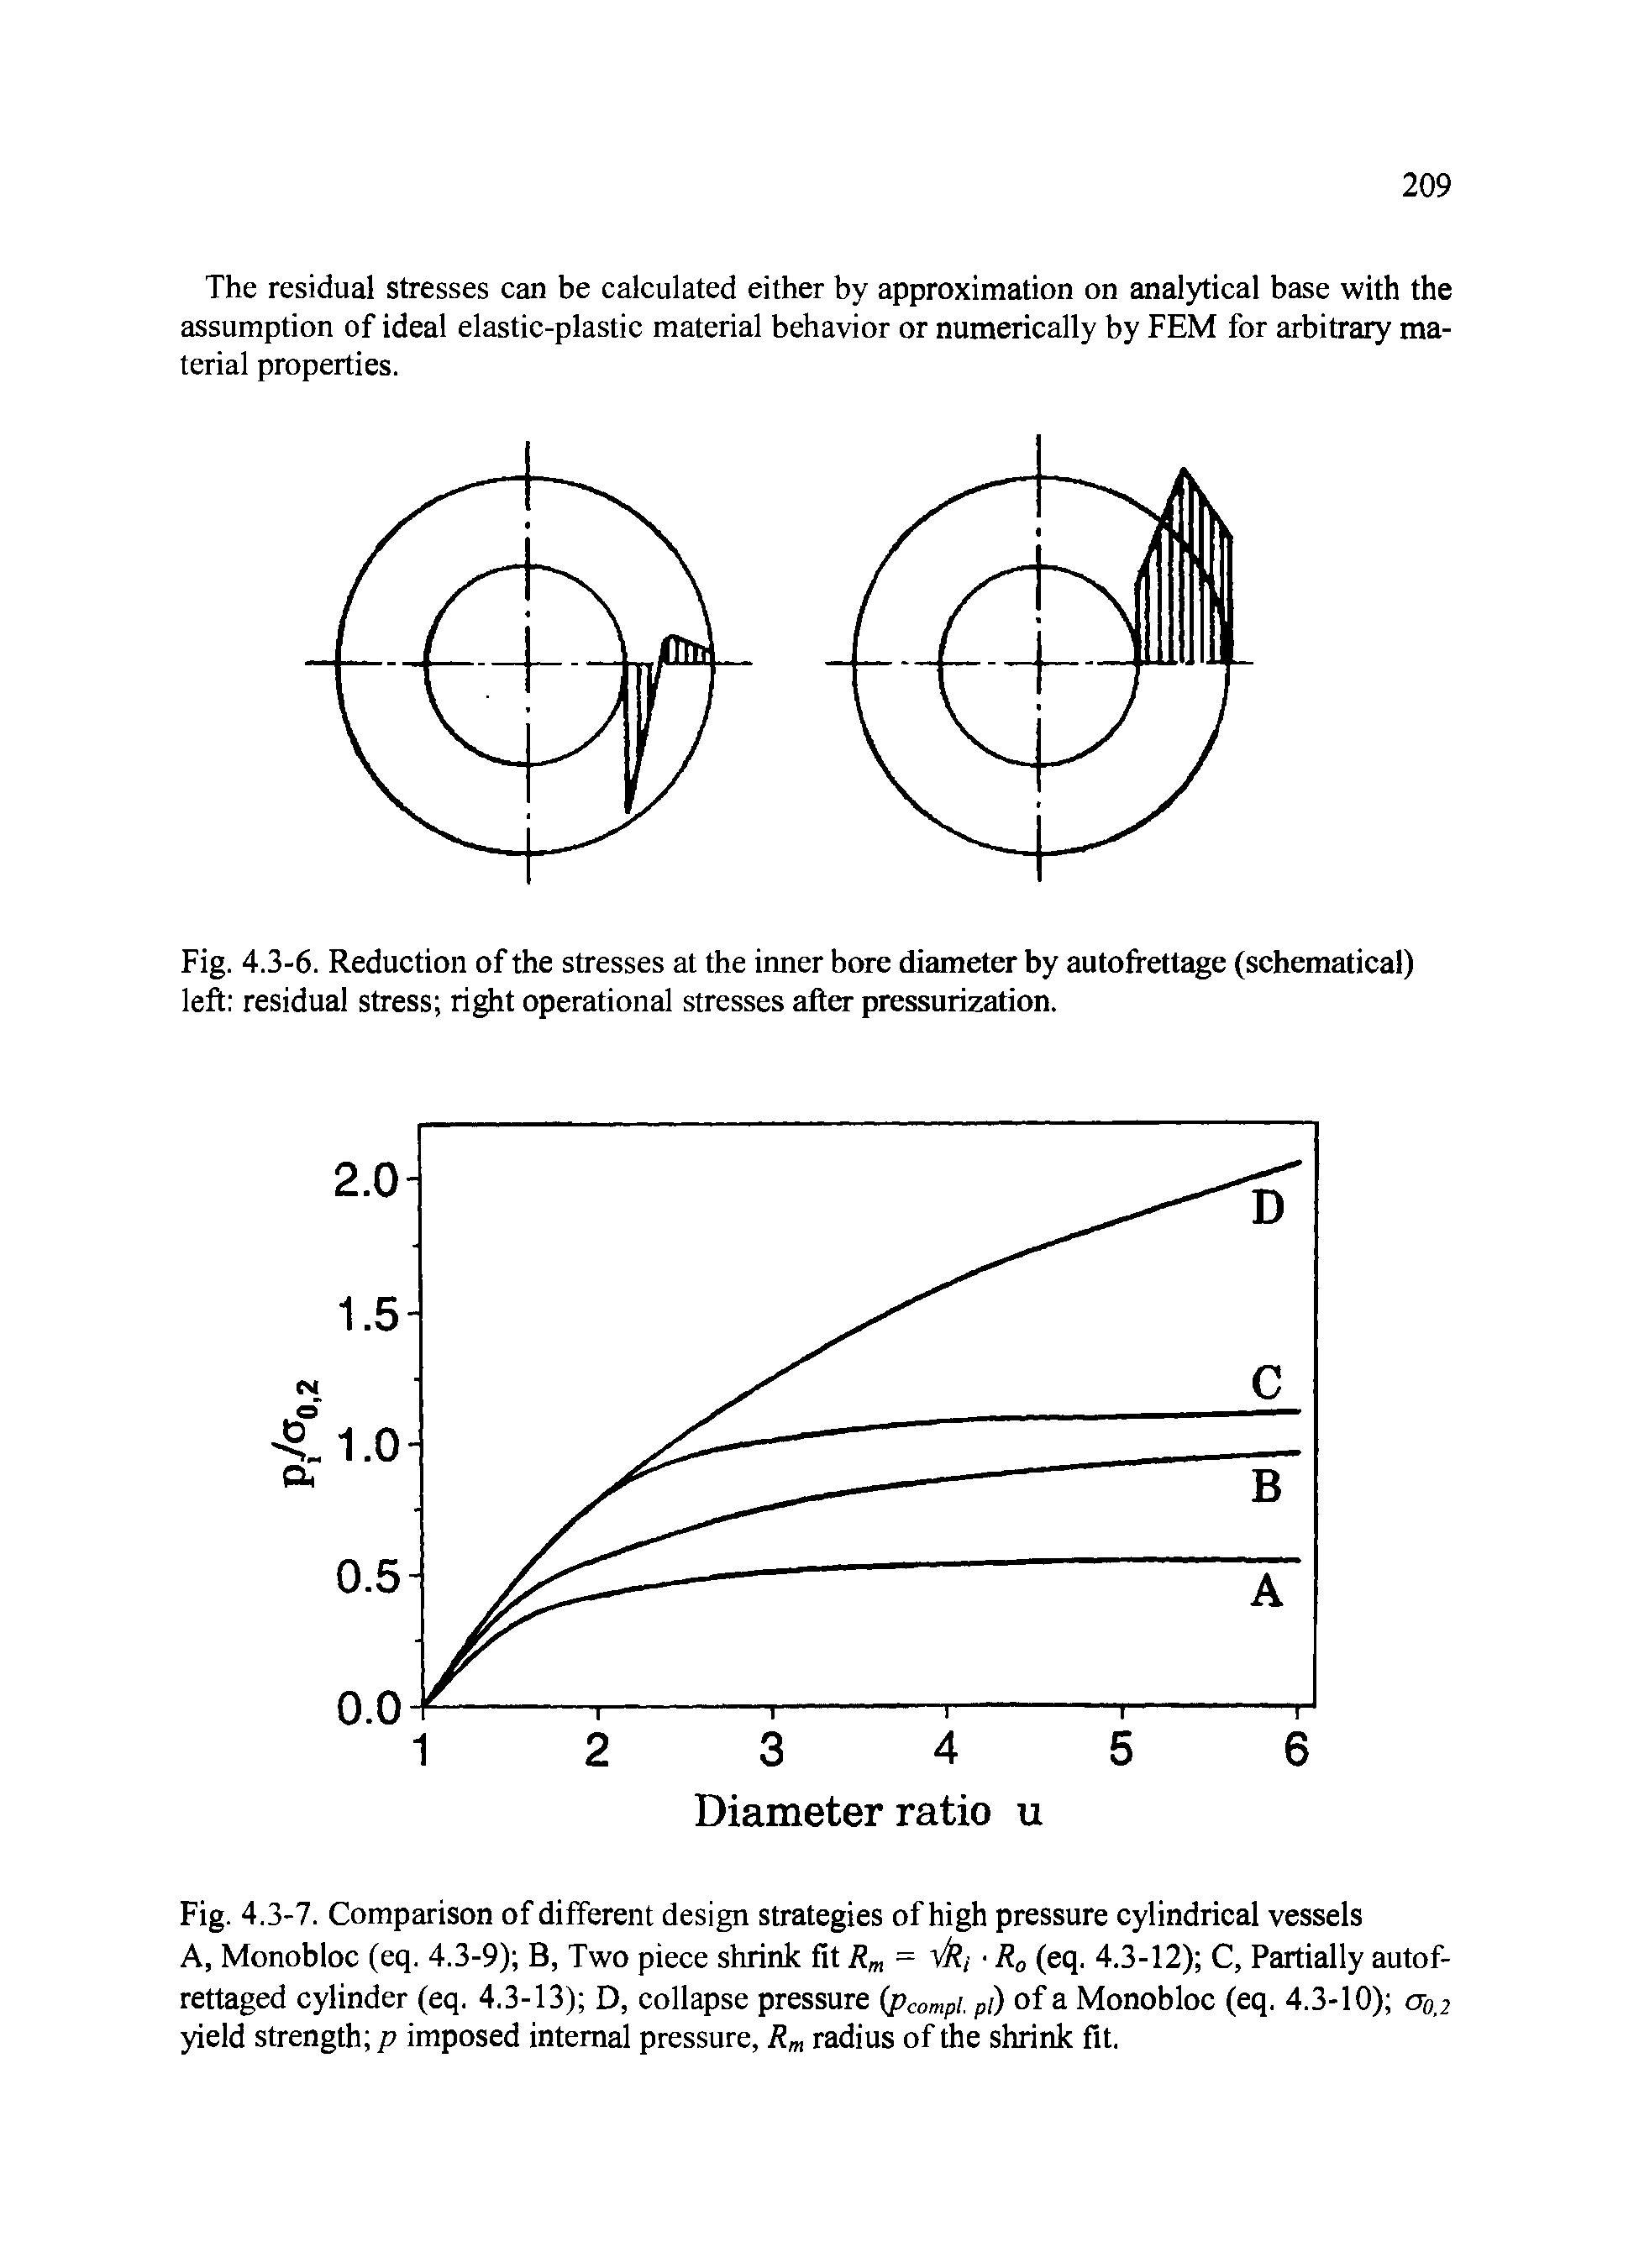 Fig. 4.3-6. Reduction of the stresses at the inner bore diameter by autoffettage (schematical) left residual stress right operational stresses after pressurization.